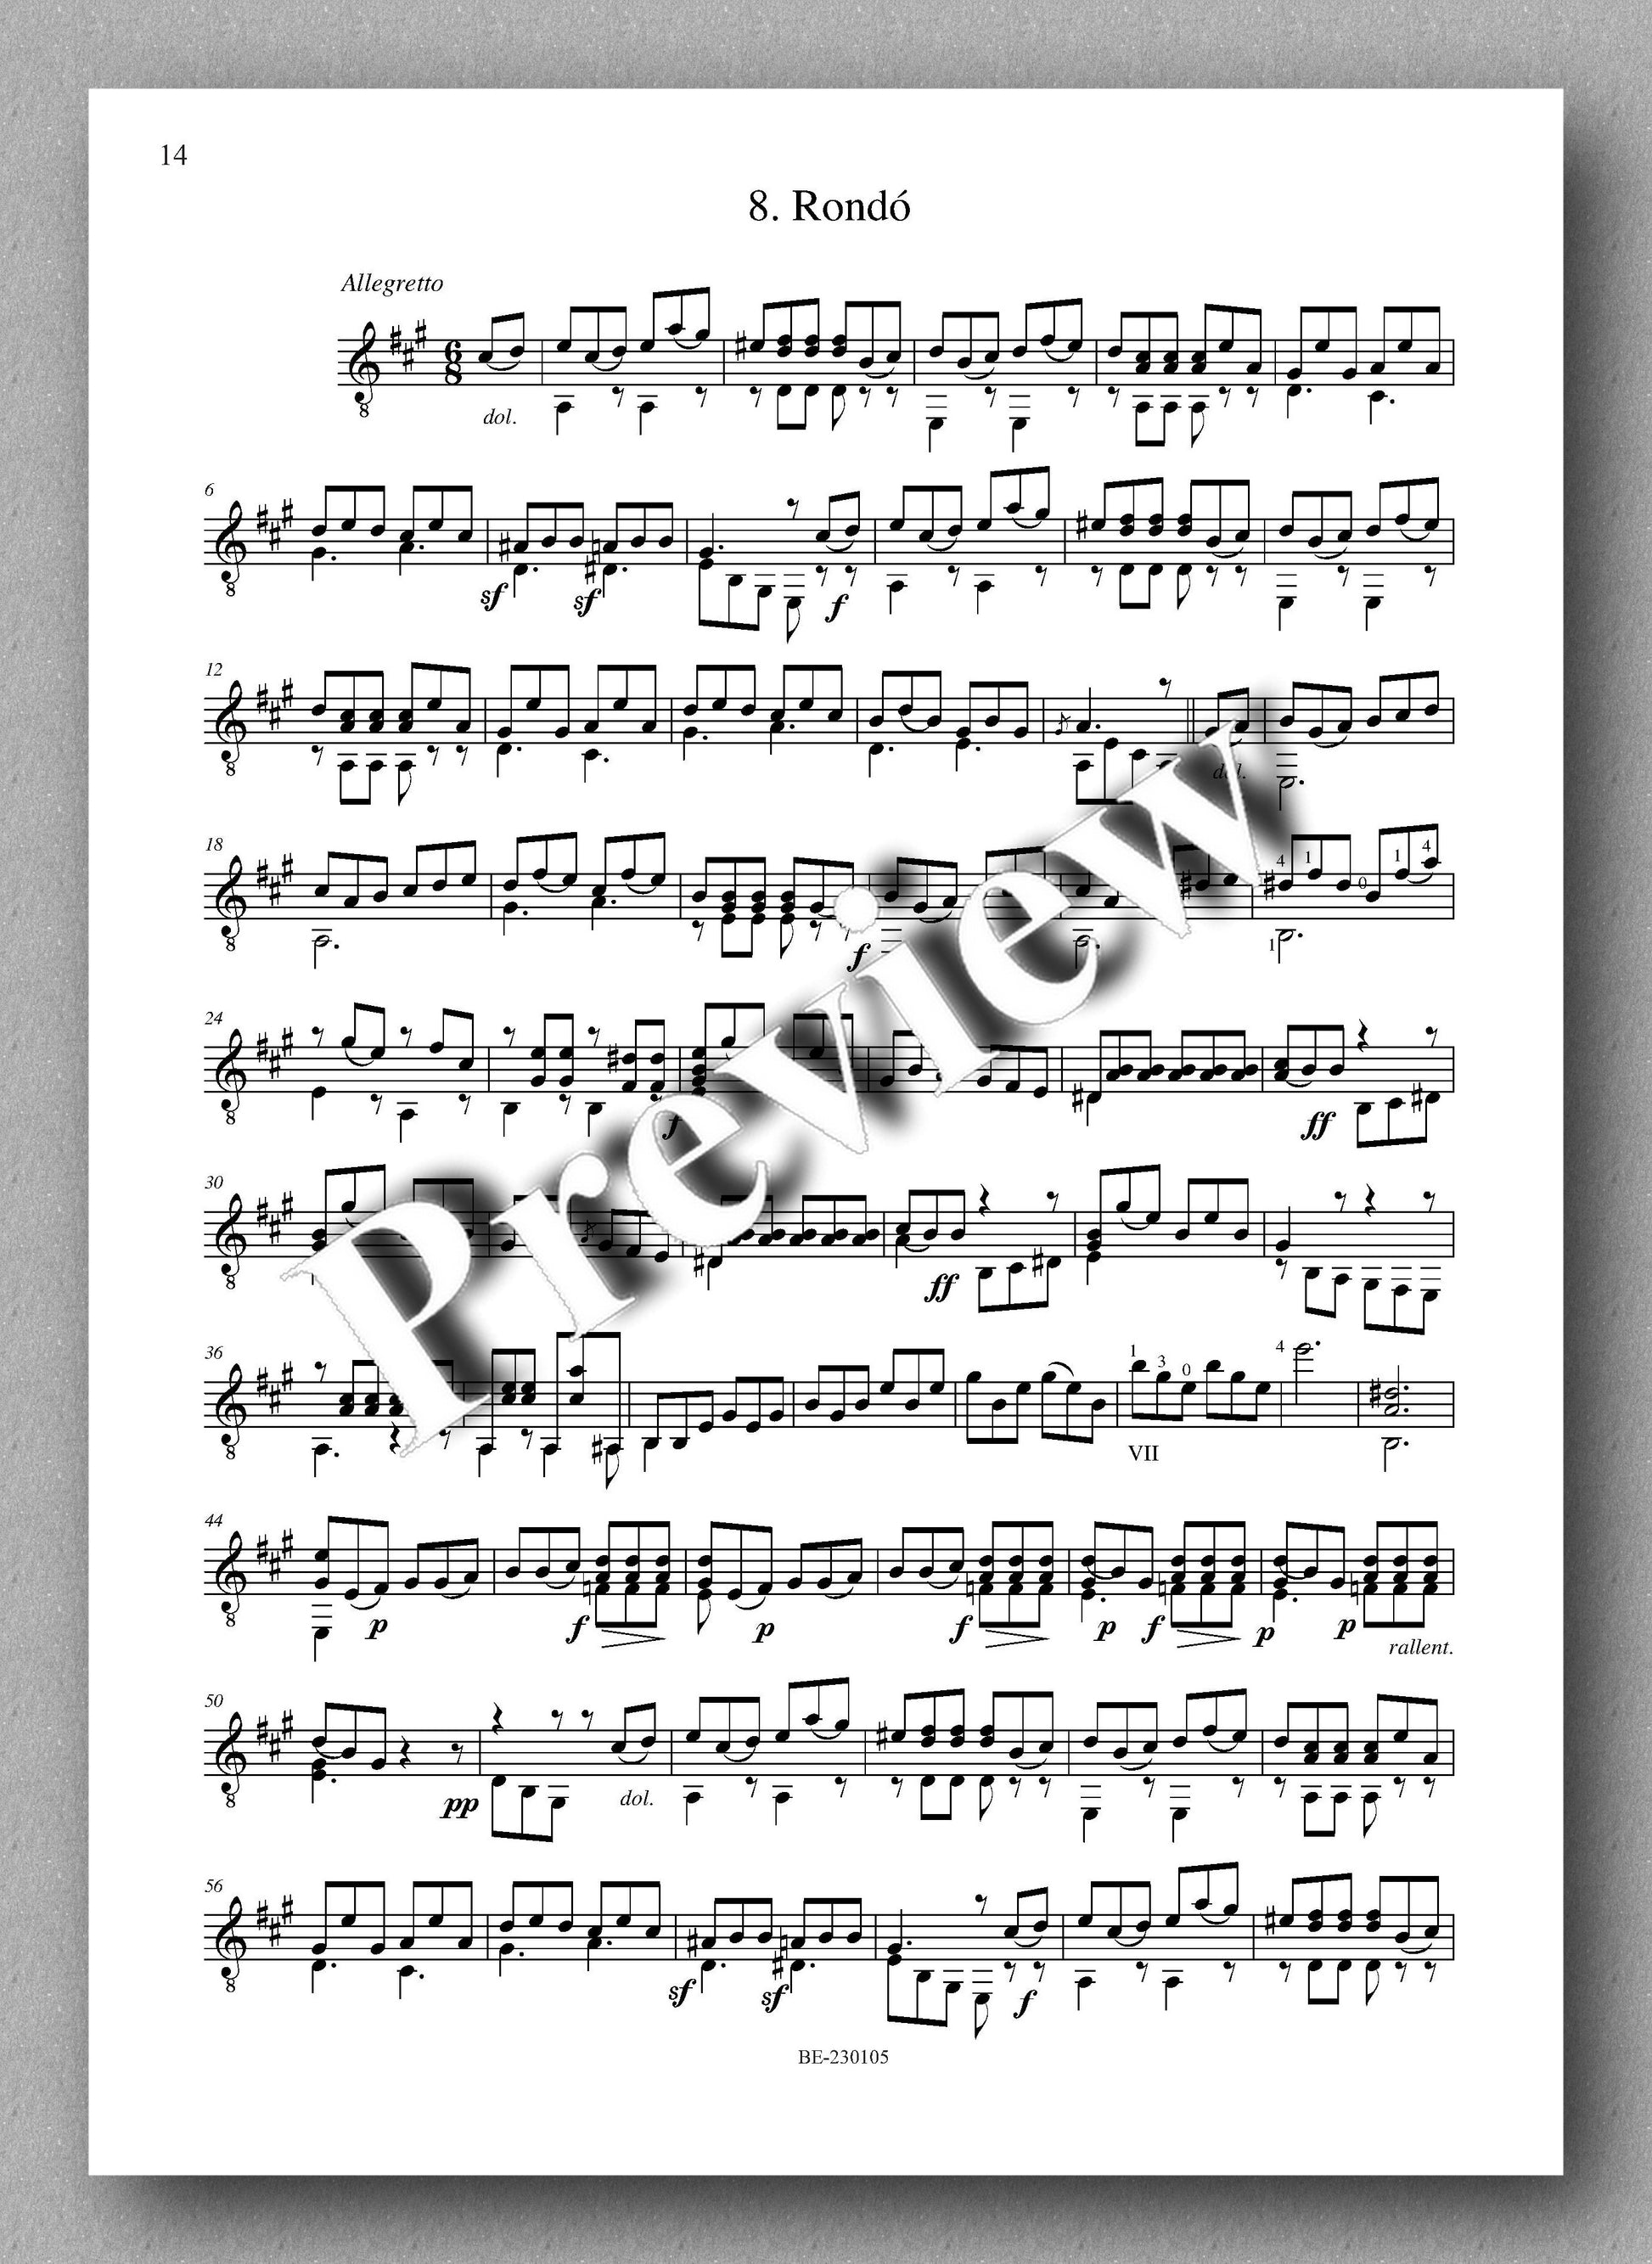 Molino, Collected Works for Guitar Solo, Vol. 17 - preview of the music score 4